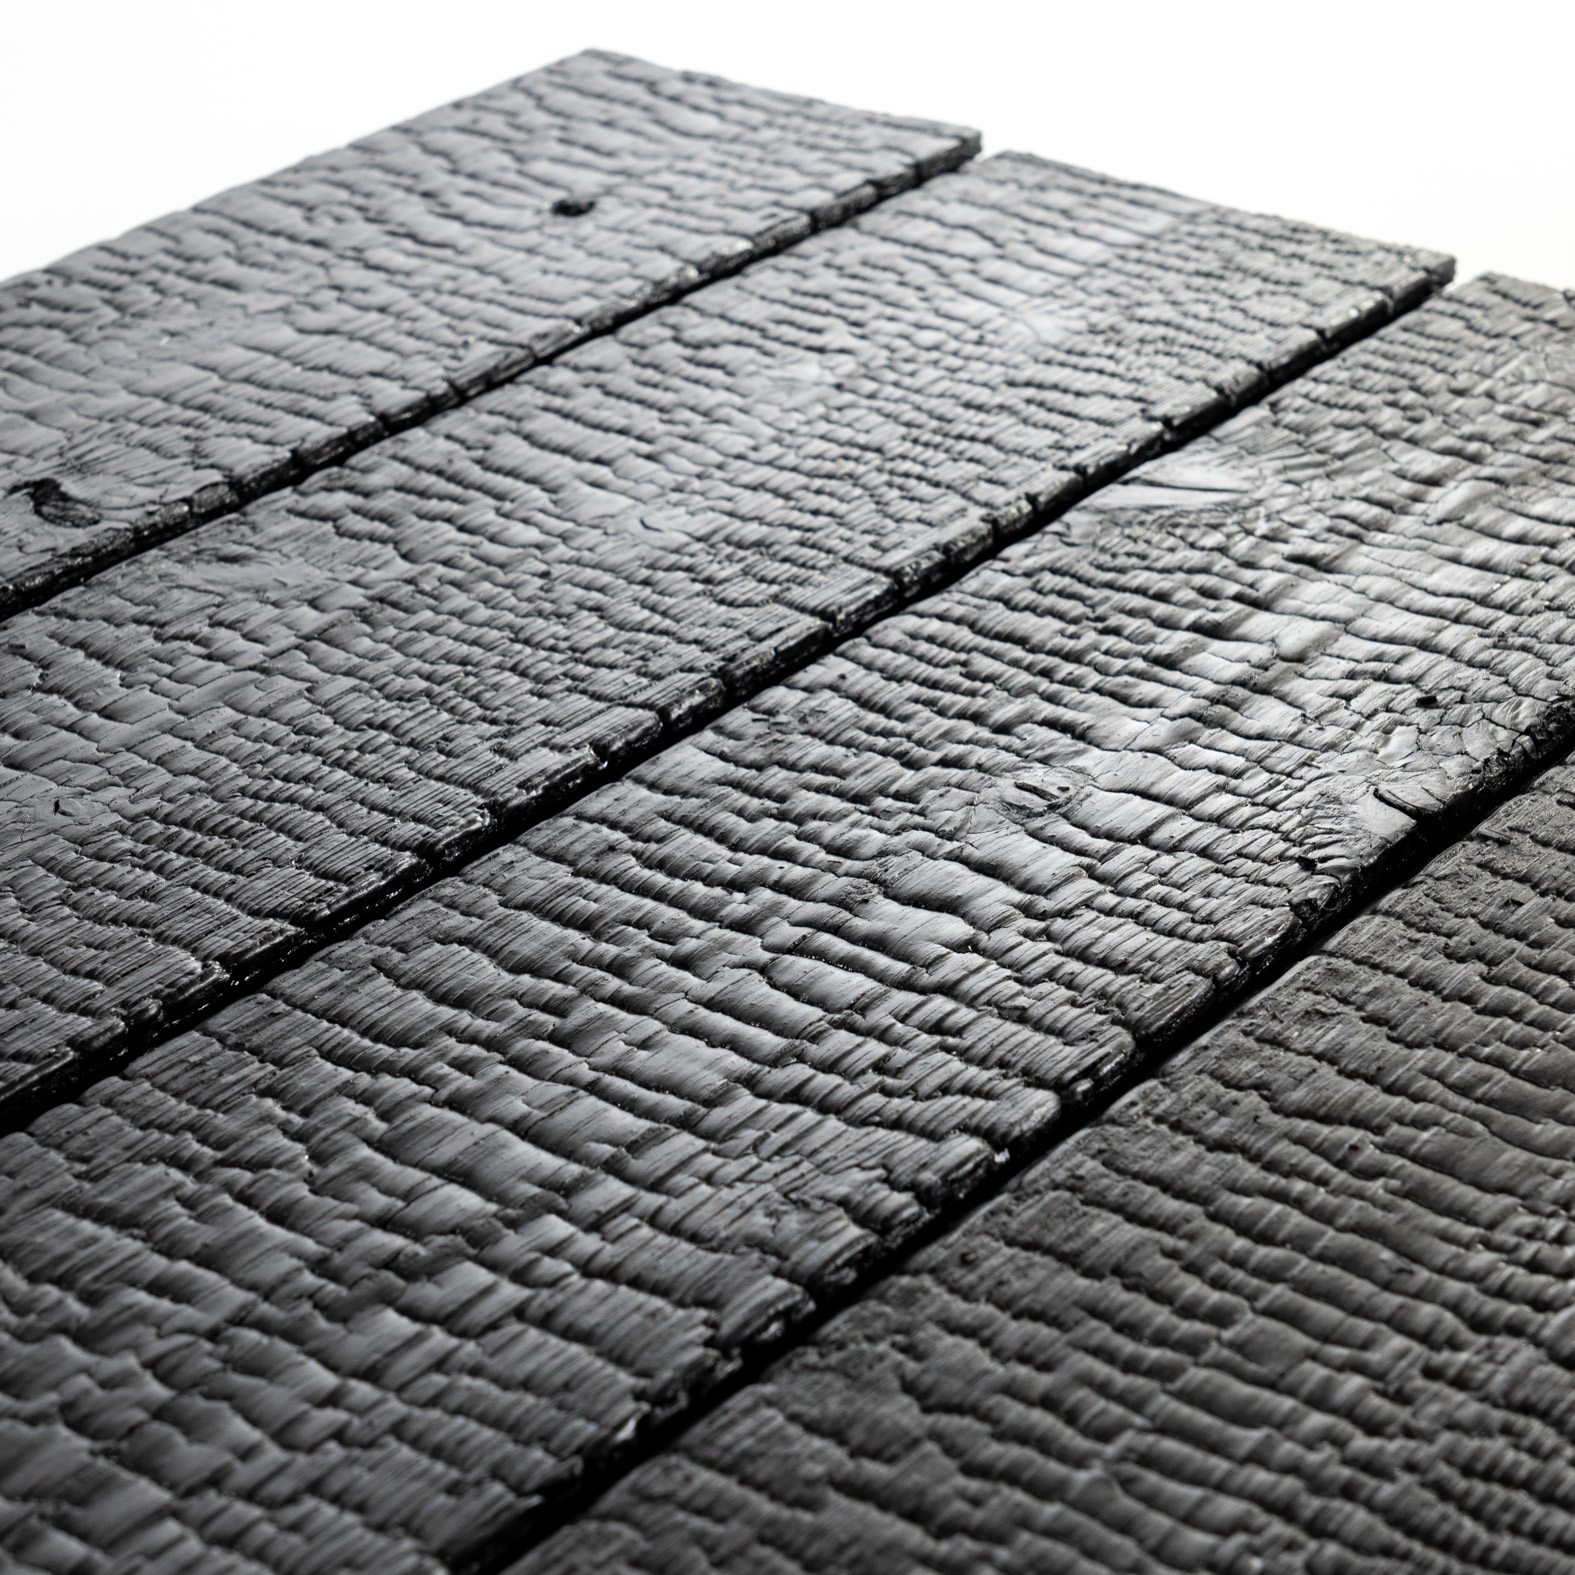 Confused about shou sugi ban, or charred wood siding in general? Don’t fret, we know it can be confusing and we’re here to help! Intereste